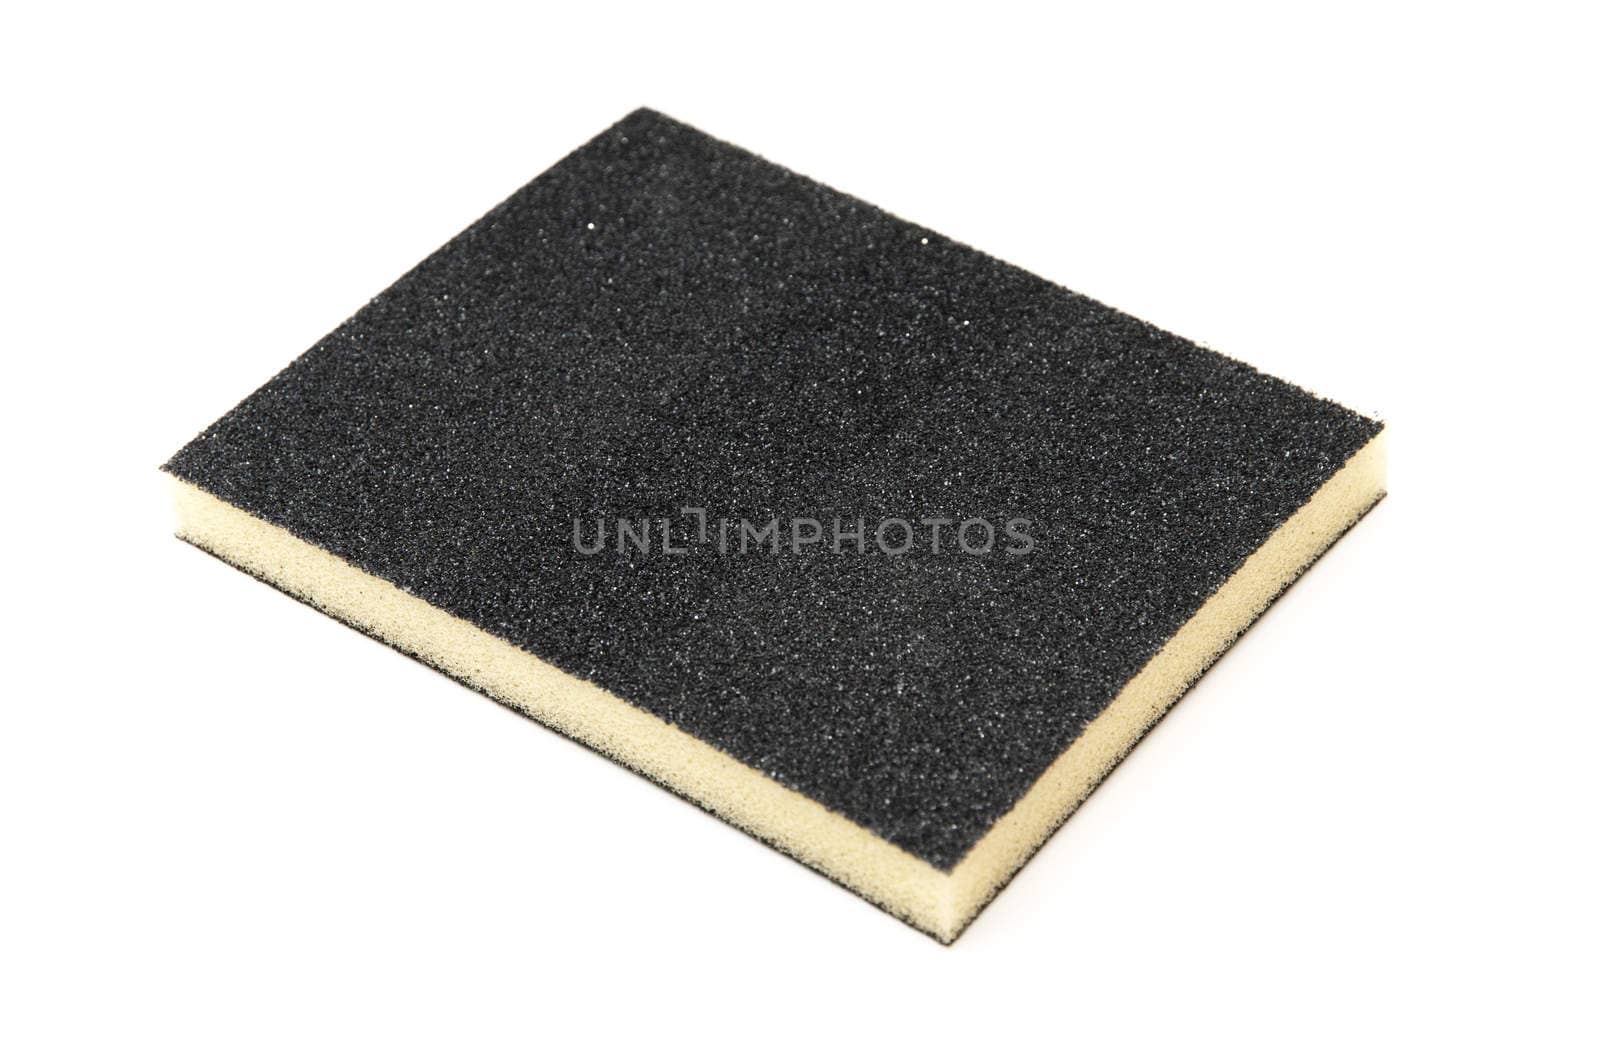 piece of sandpaper on a white background